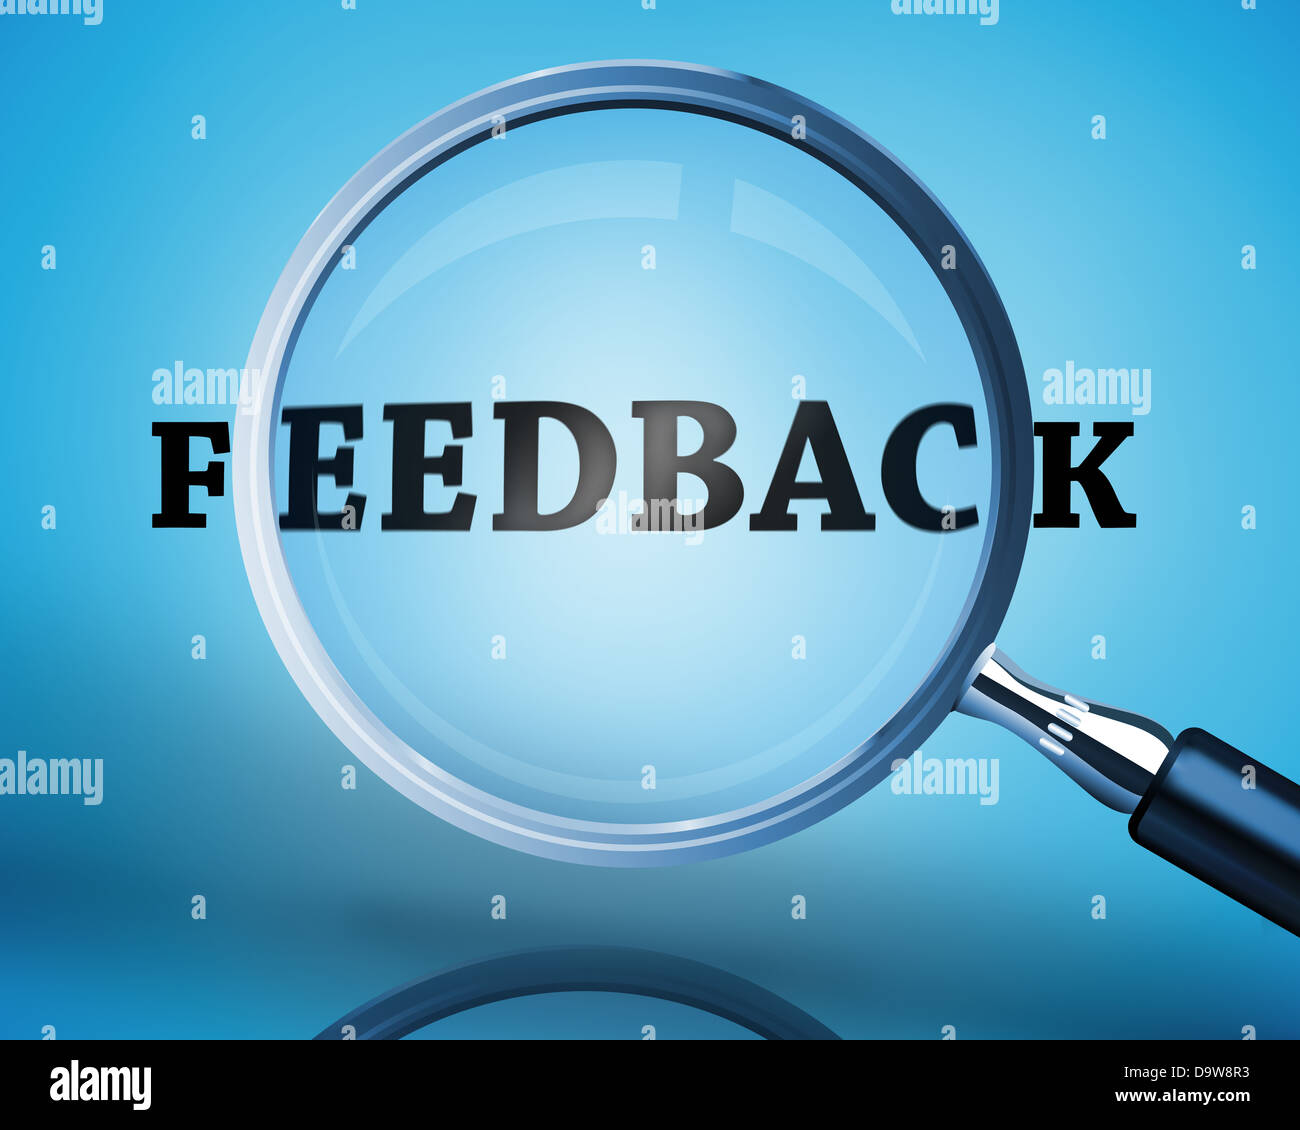 Magnifying glass showing feedback word Stock Photo